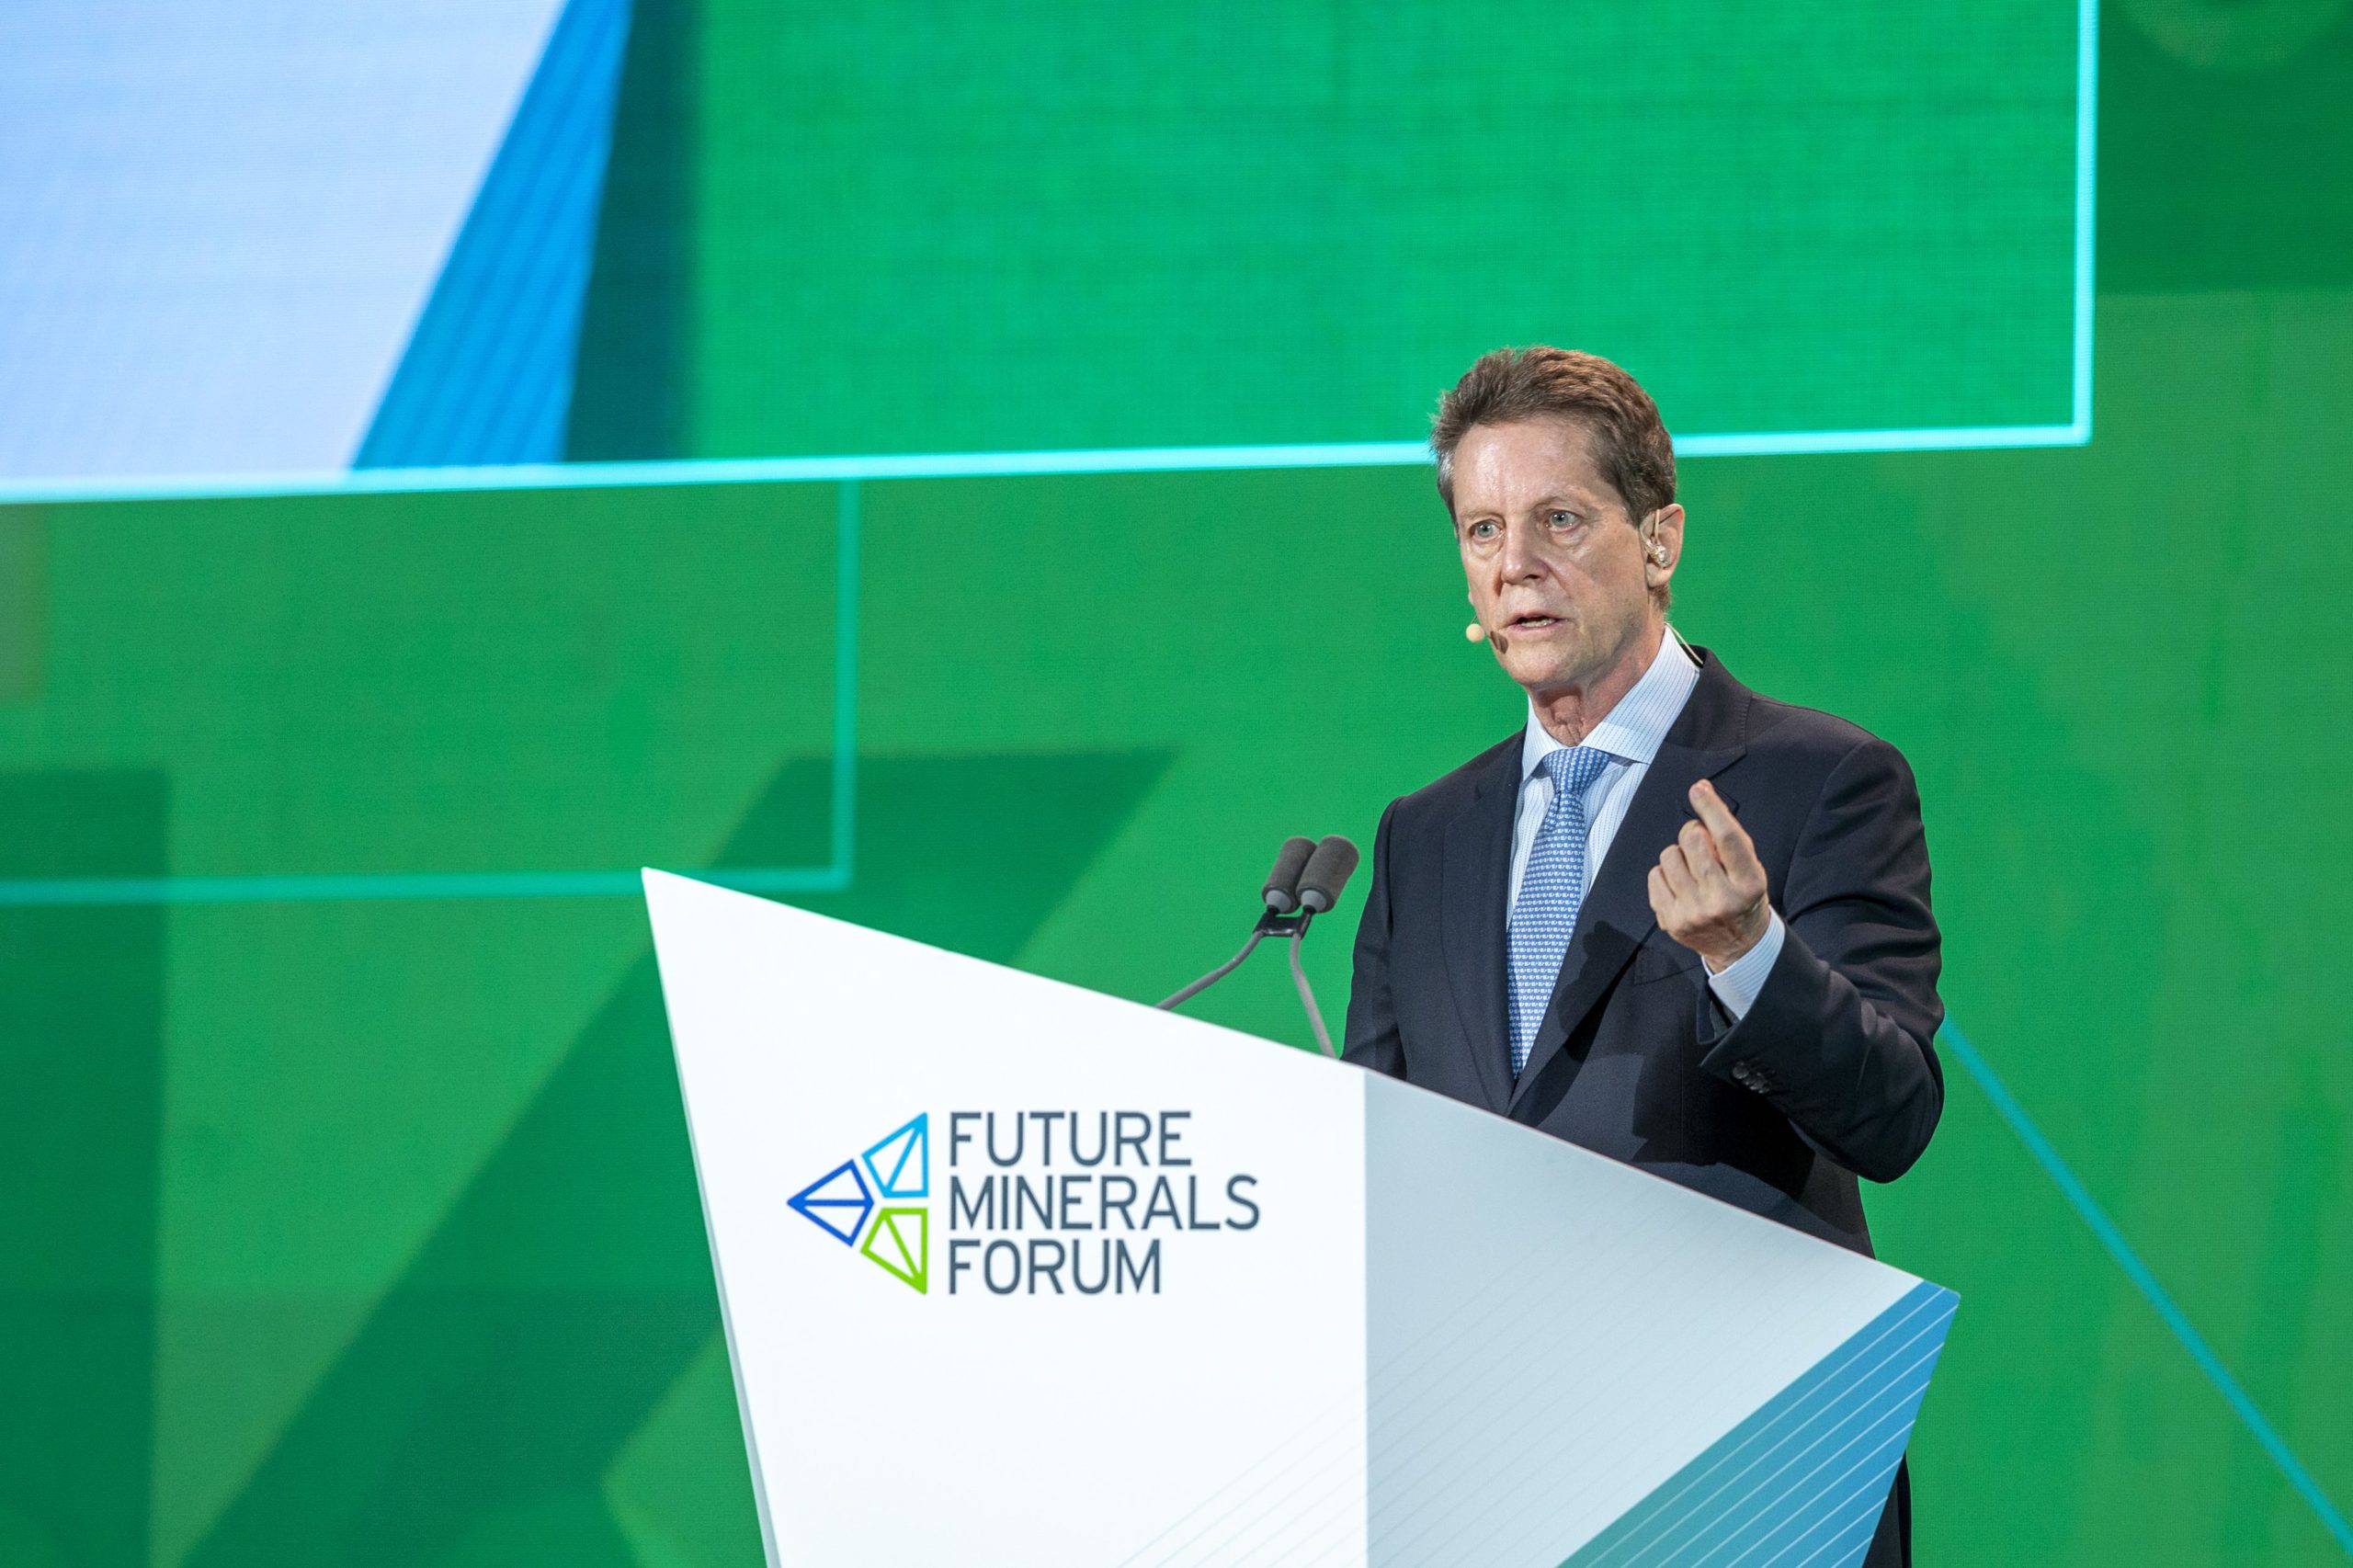 Key insights from the inaugural Future Minerals Forum in Riyadh